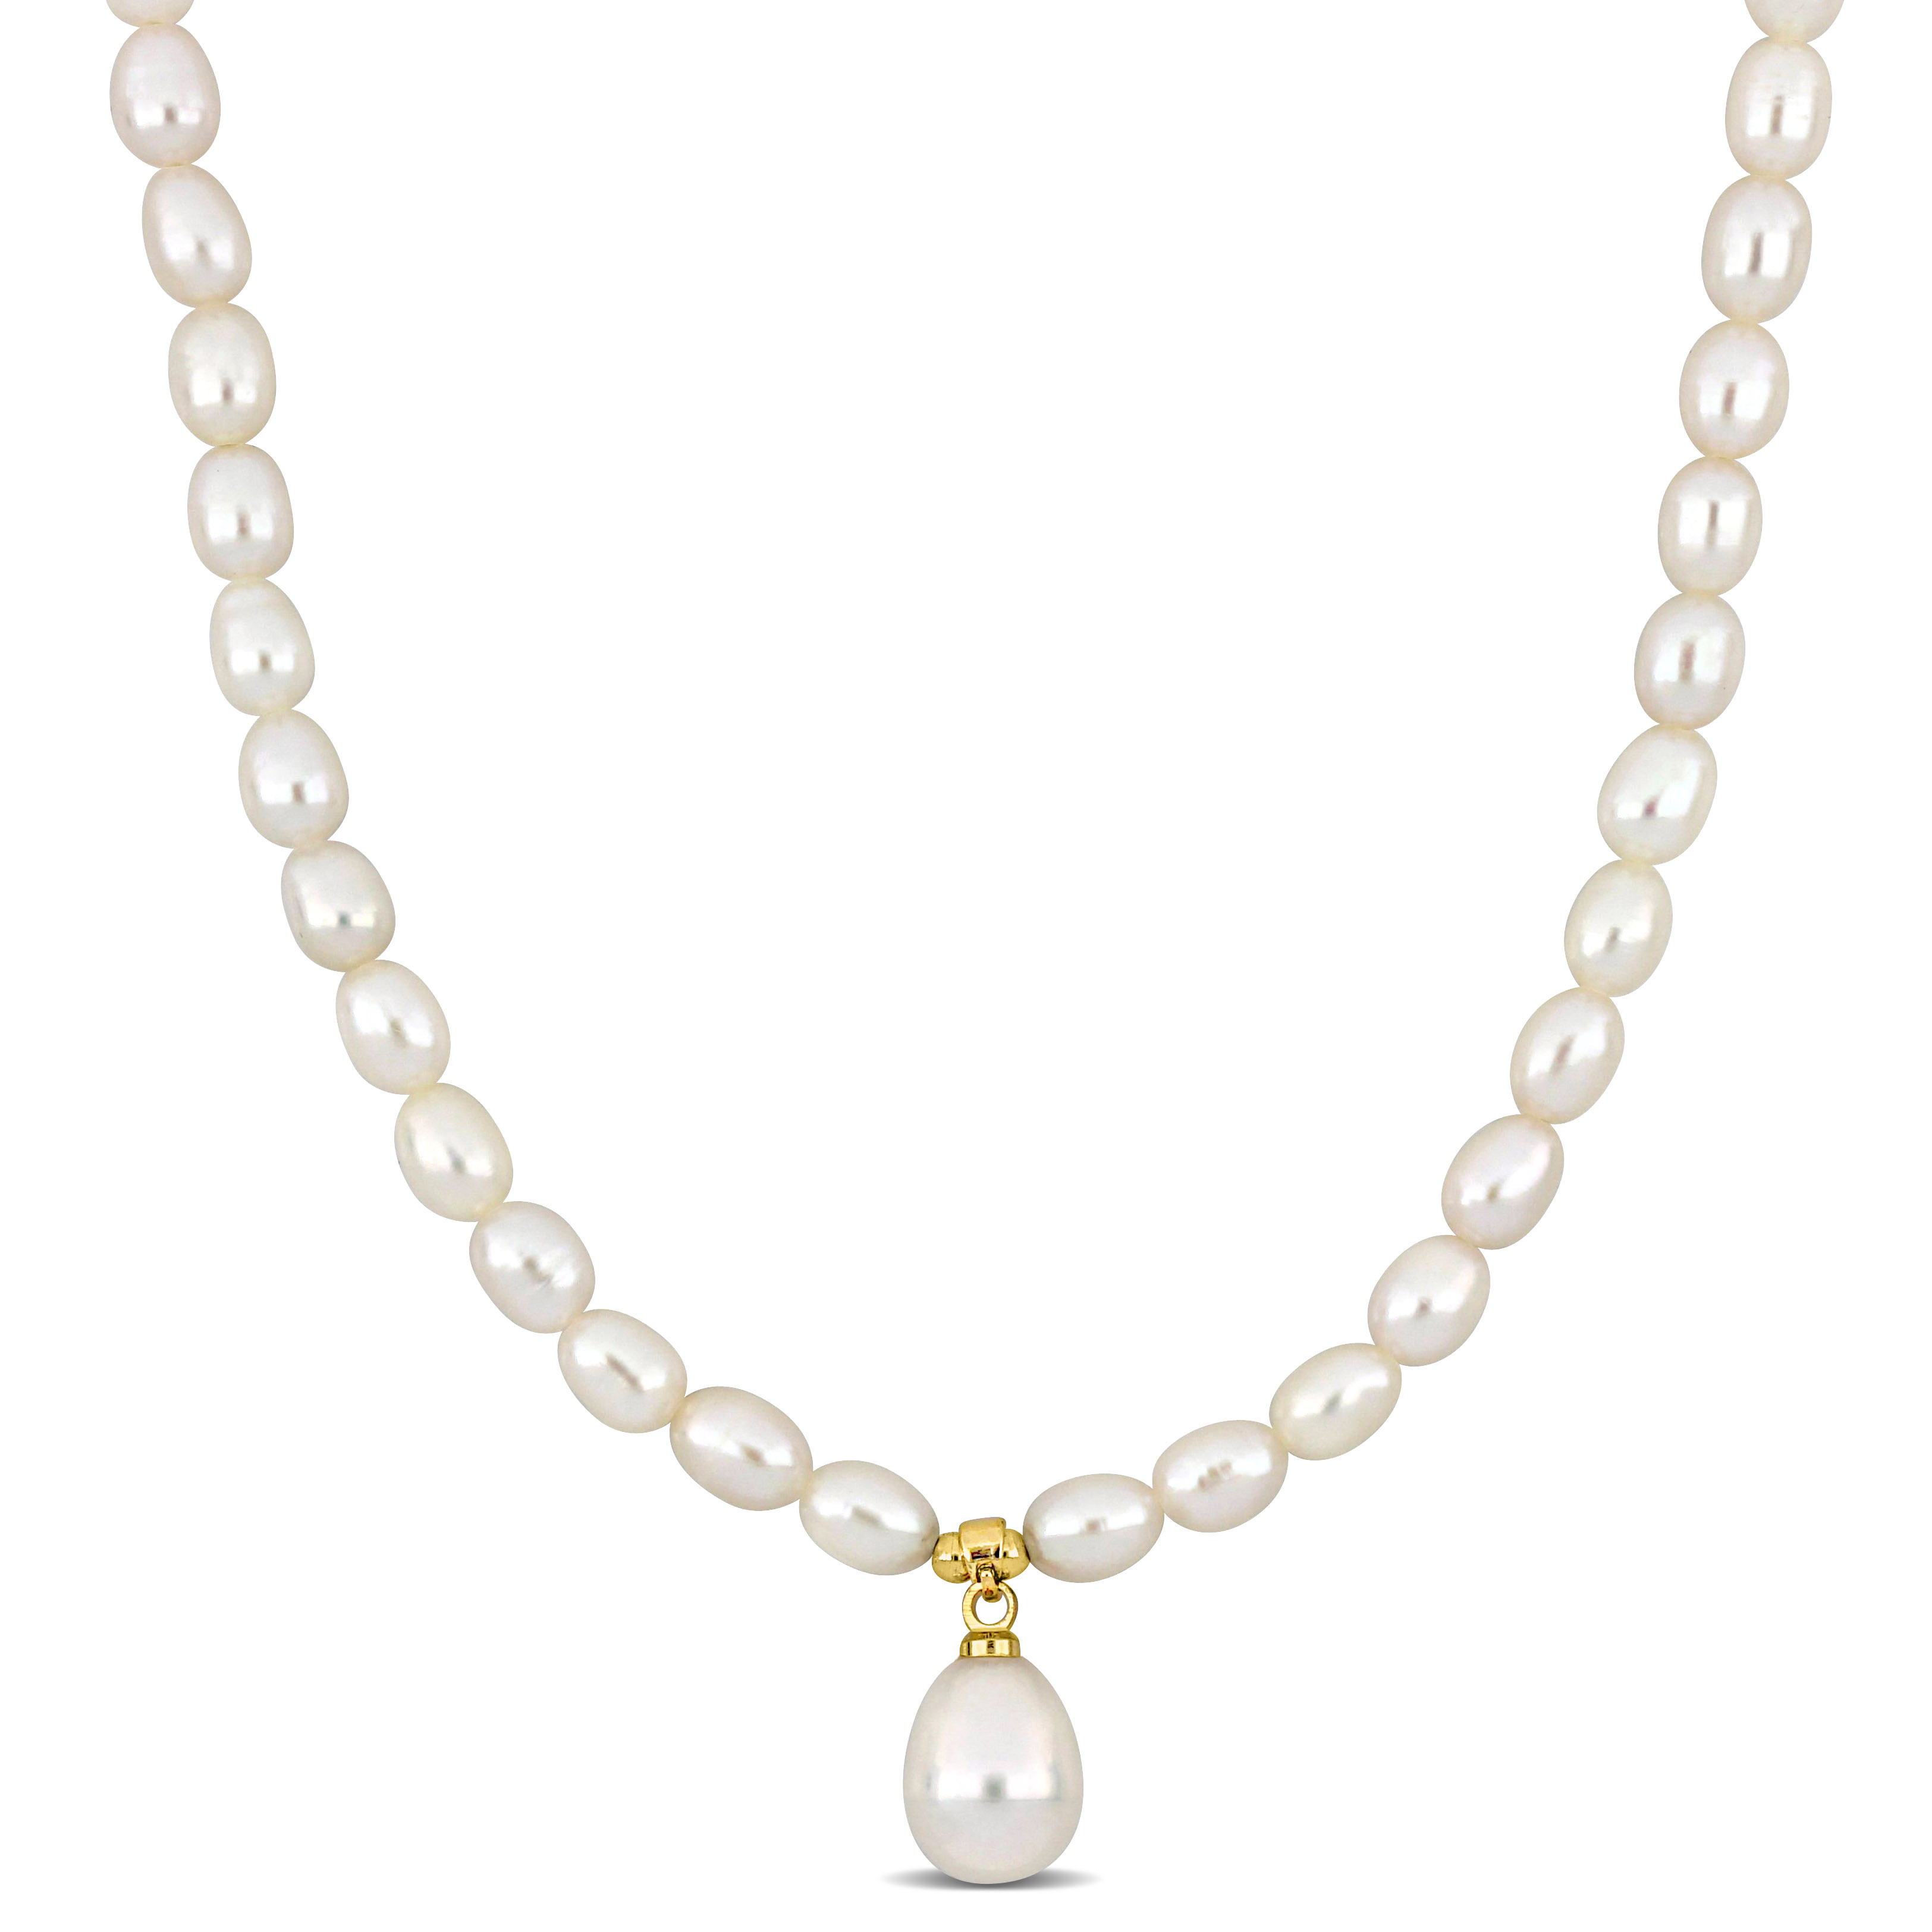 Cultured Freshwater Pearl Strand Necklace with Gold-tone Lobster Clasp - 15.5 in